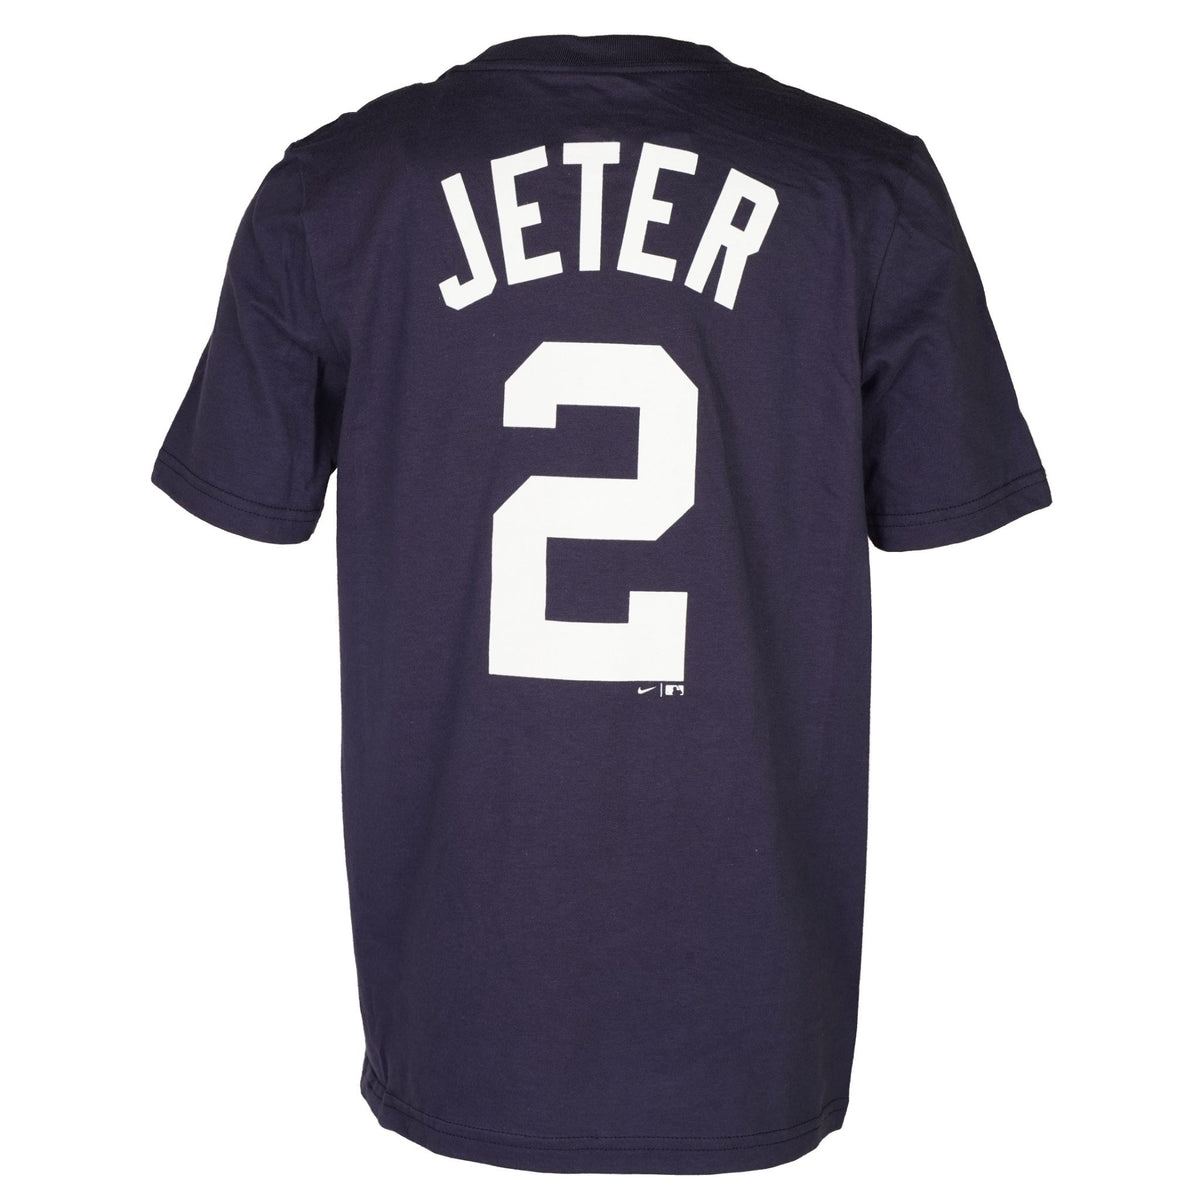 Jeter Name & Number Tee | Denny's